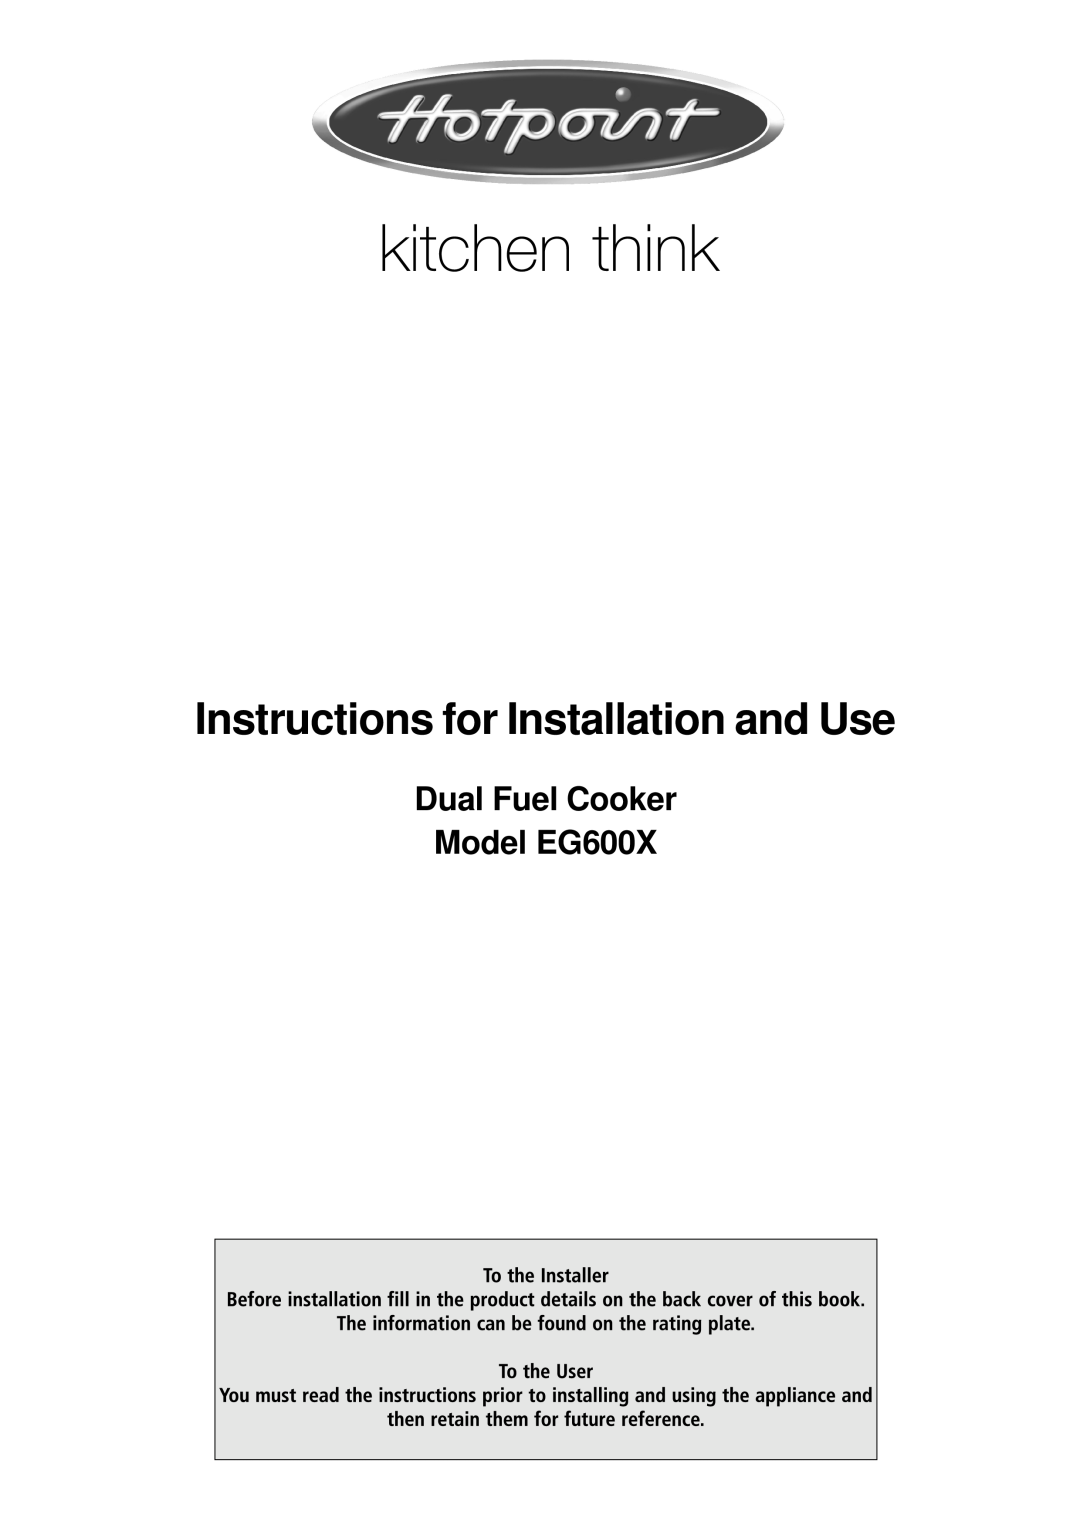 Hotpoint manual Dual Fuel Cooker Model EG600X, Instructions for Installation and Use 